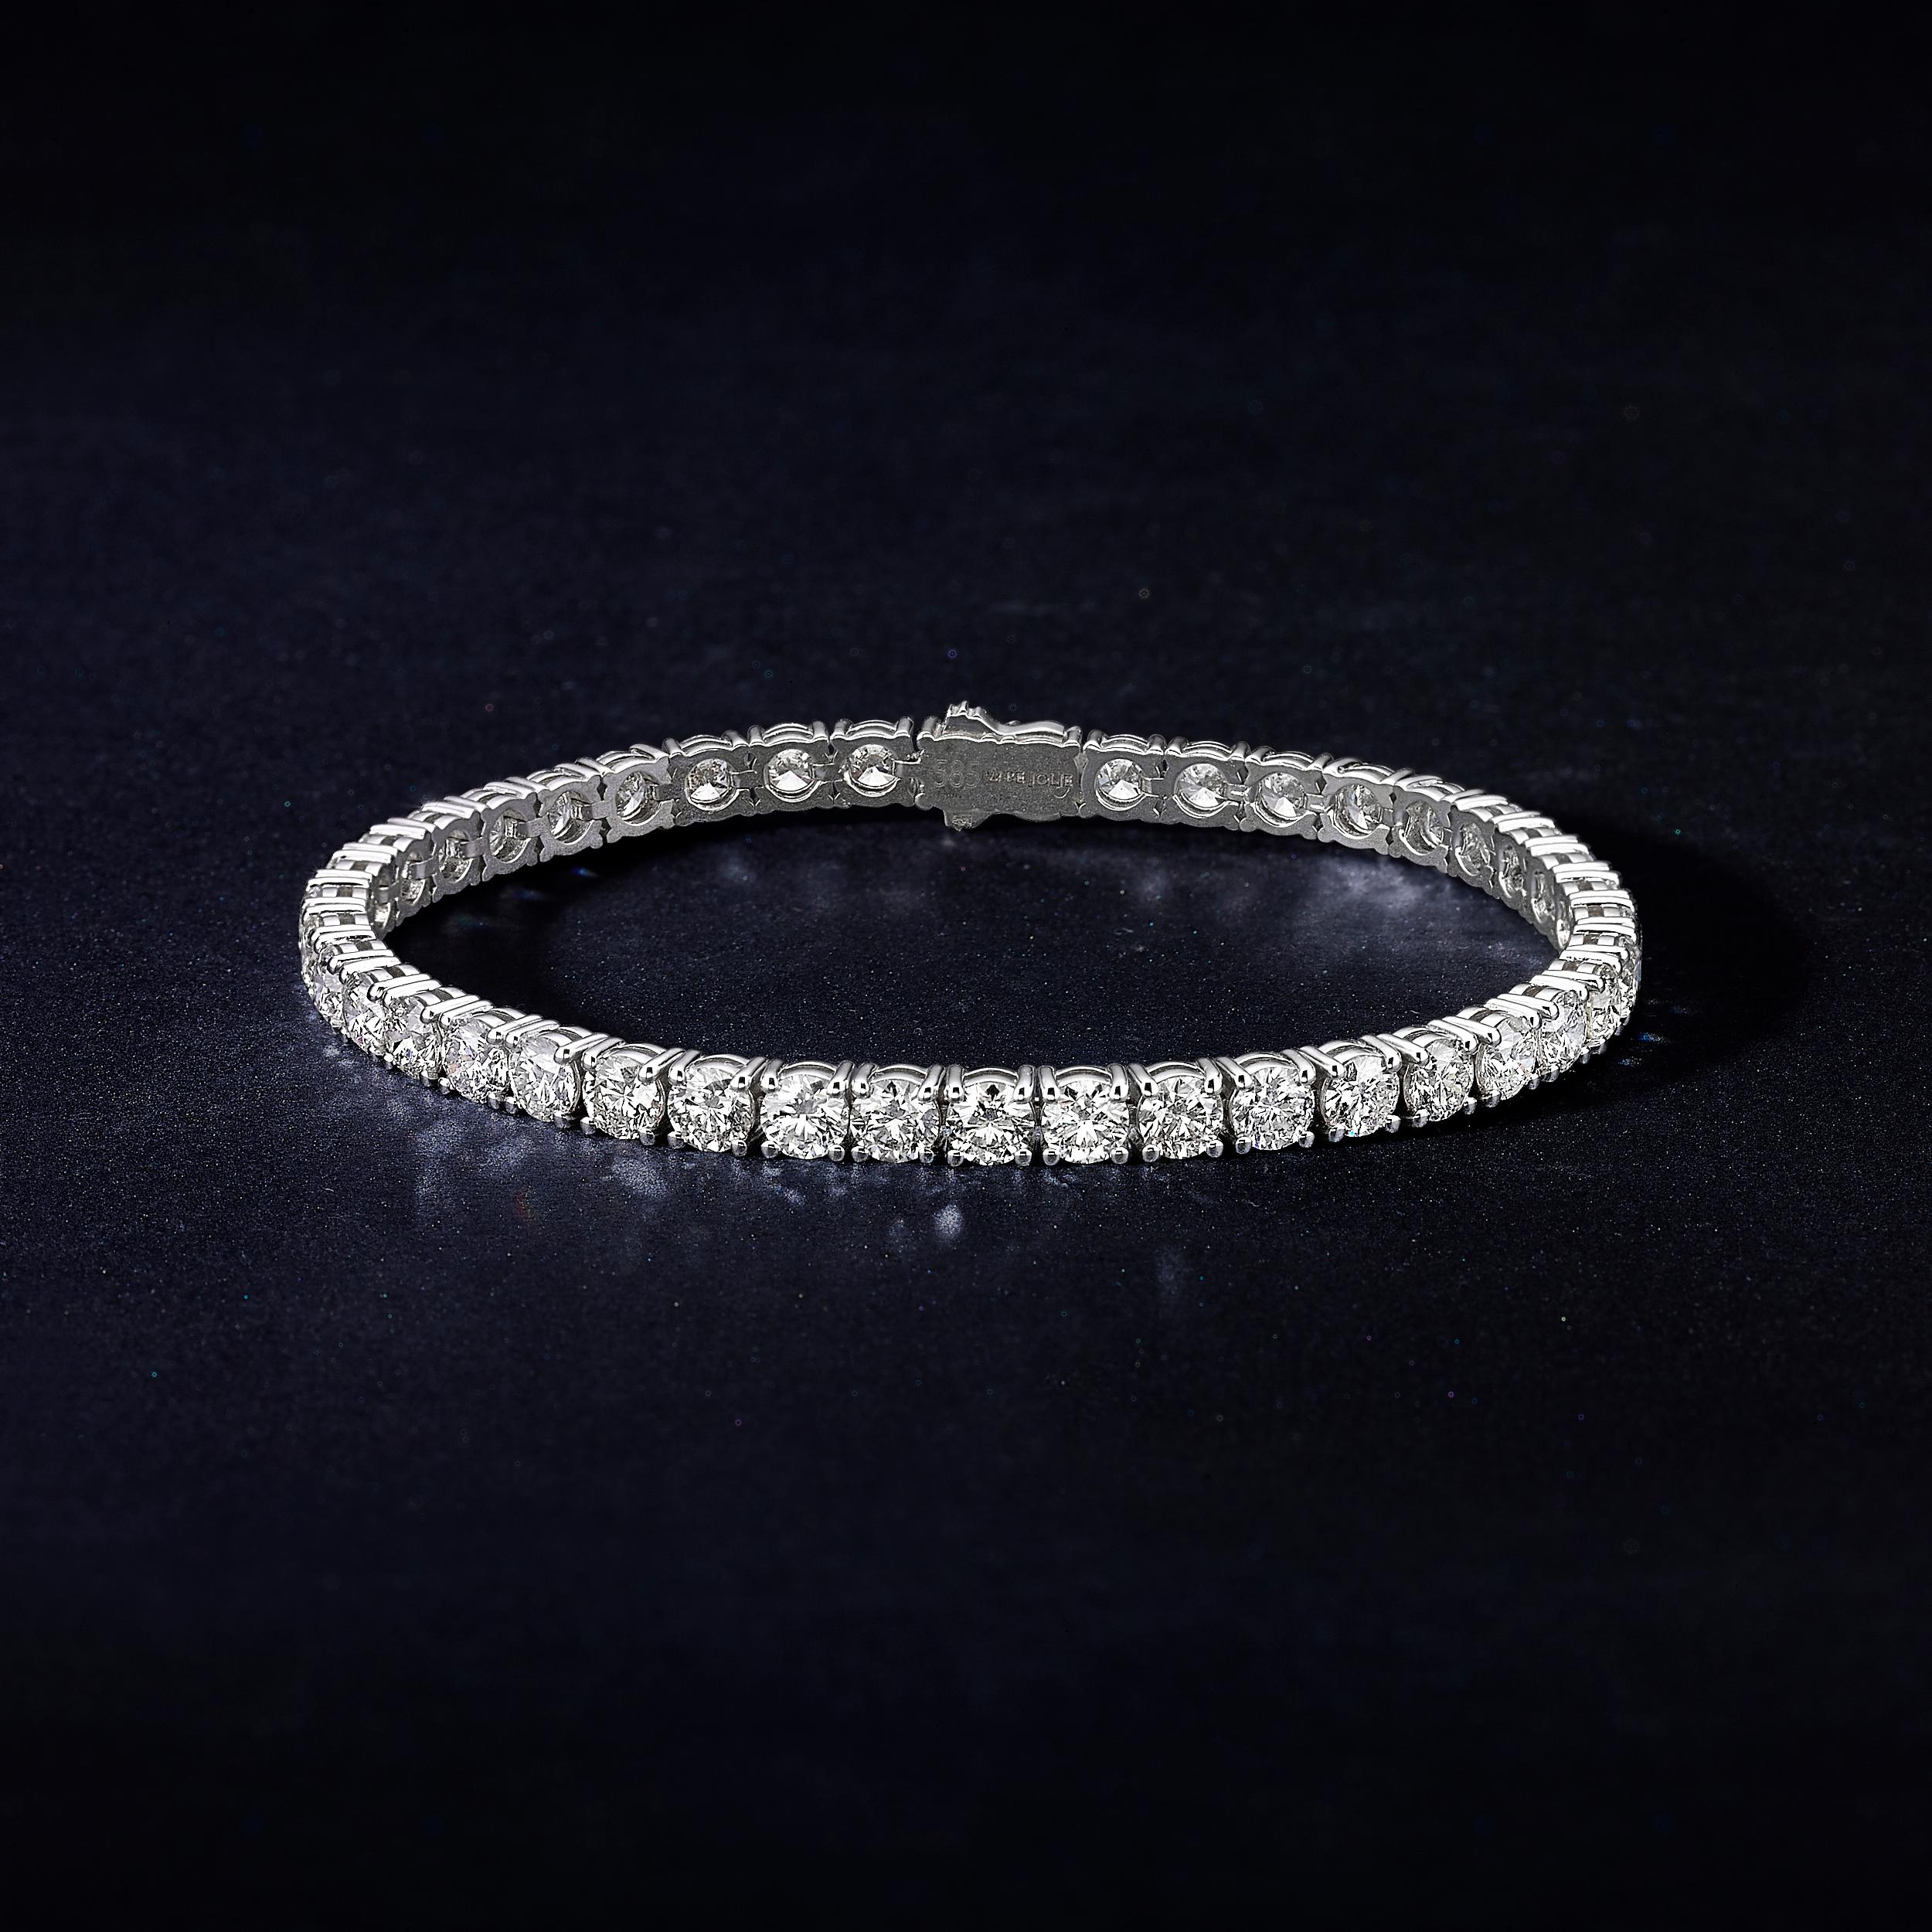 Classic 10.46 Carat tennis bracelet is a piece of jewelry that will grace the hand of a special woman.
The bracelet features dazzling round cut diamonds and mounted on 14K white gold. The handmade bracelet is done with precise goldsmith work. The